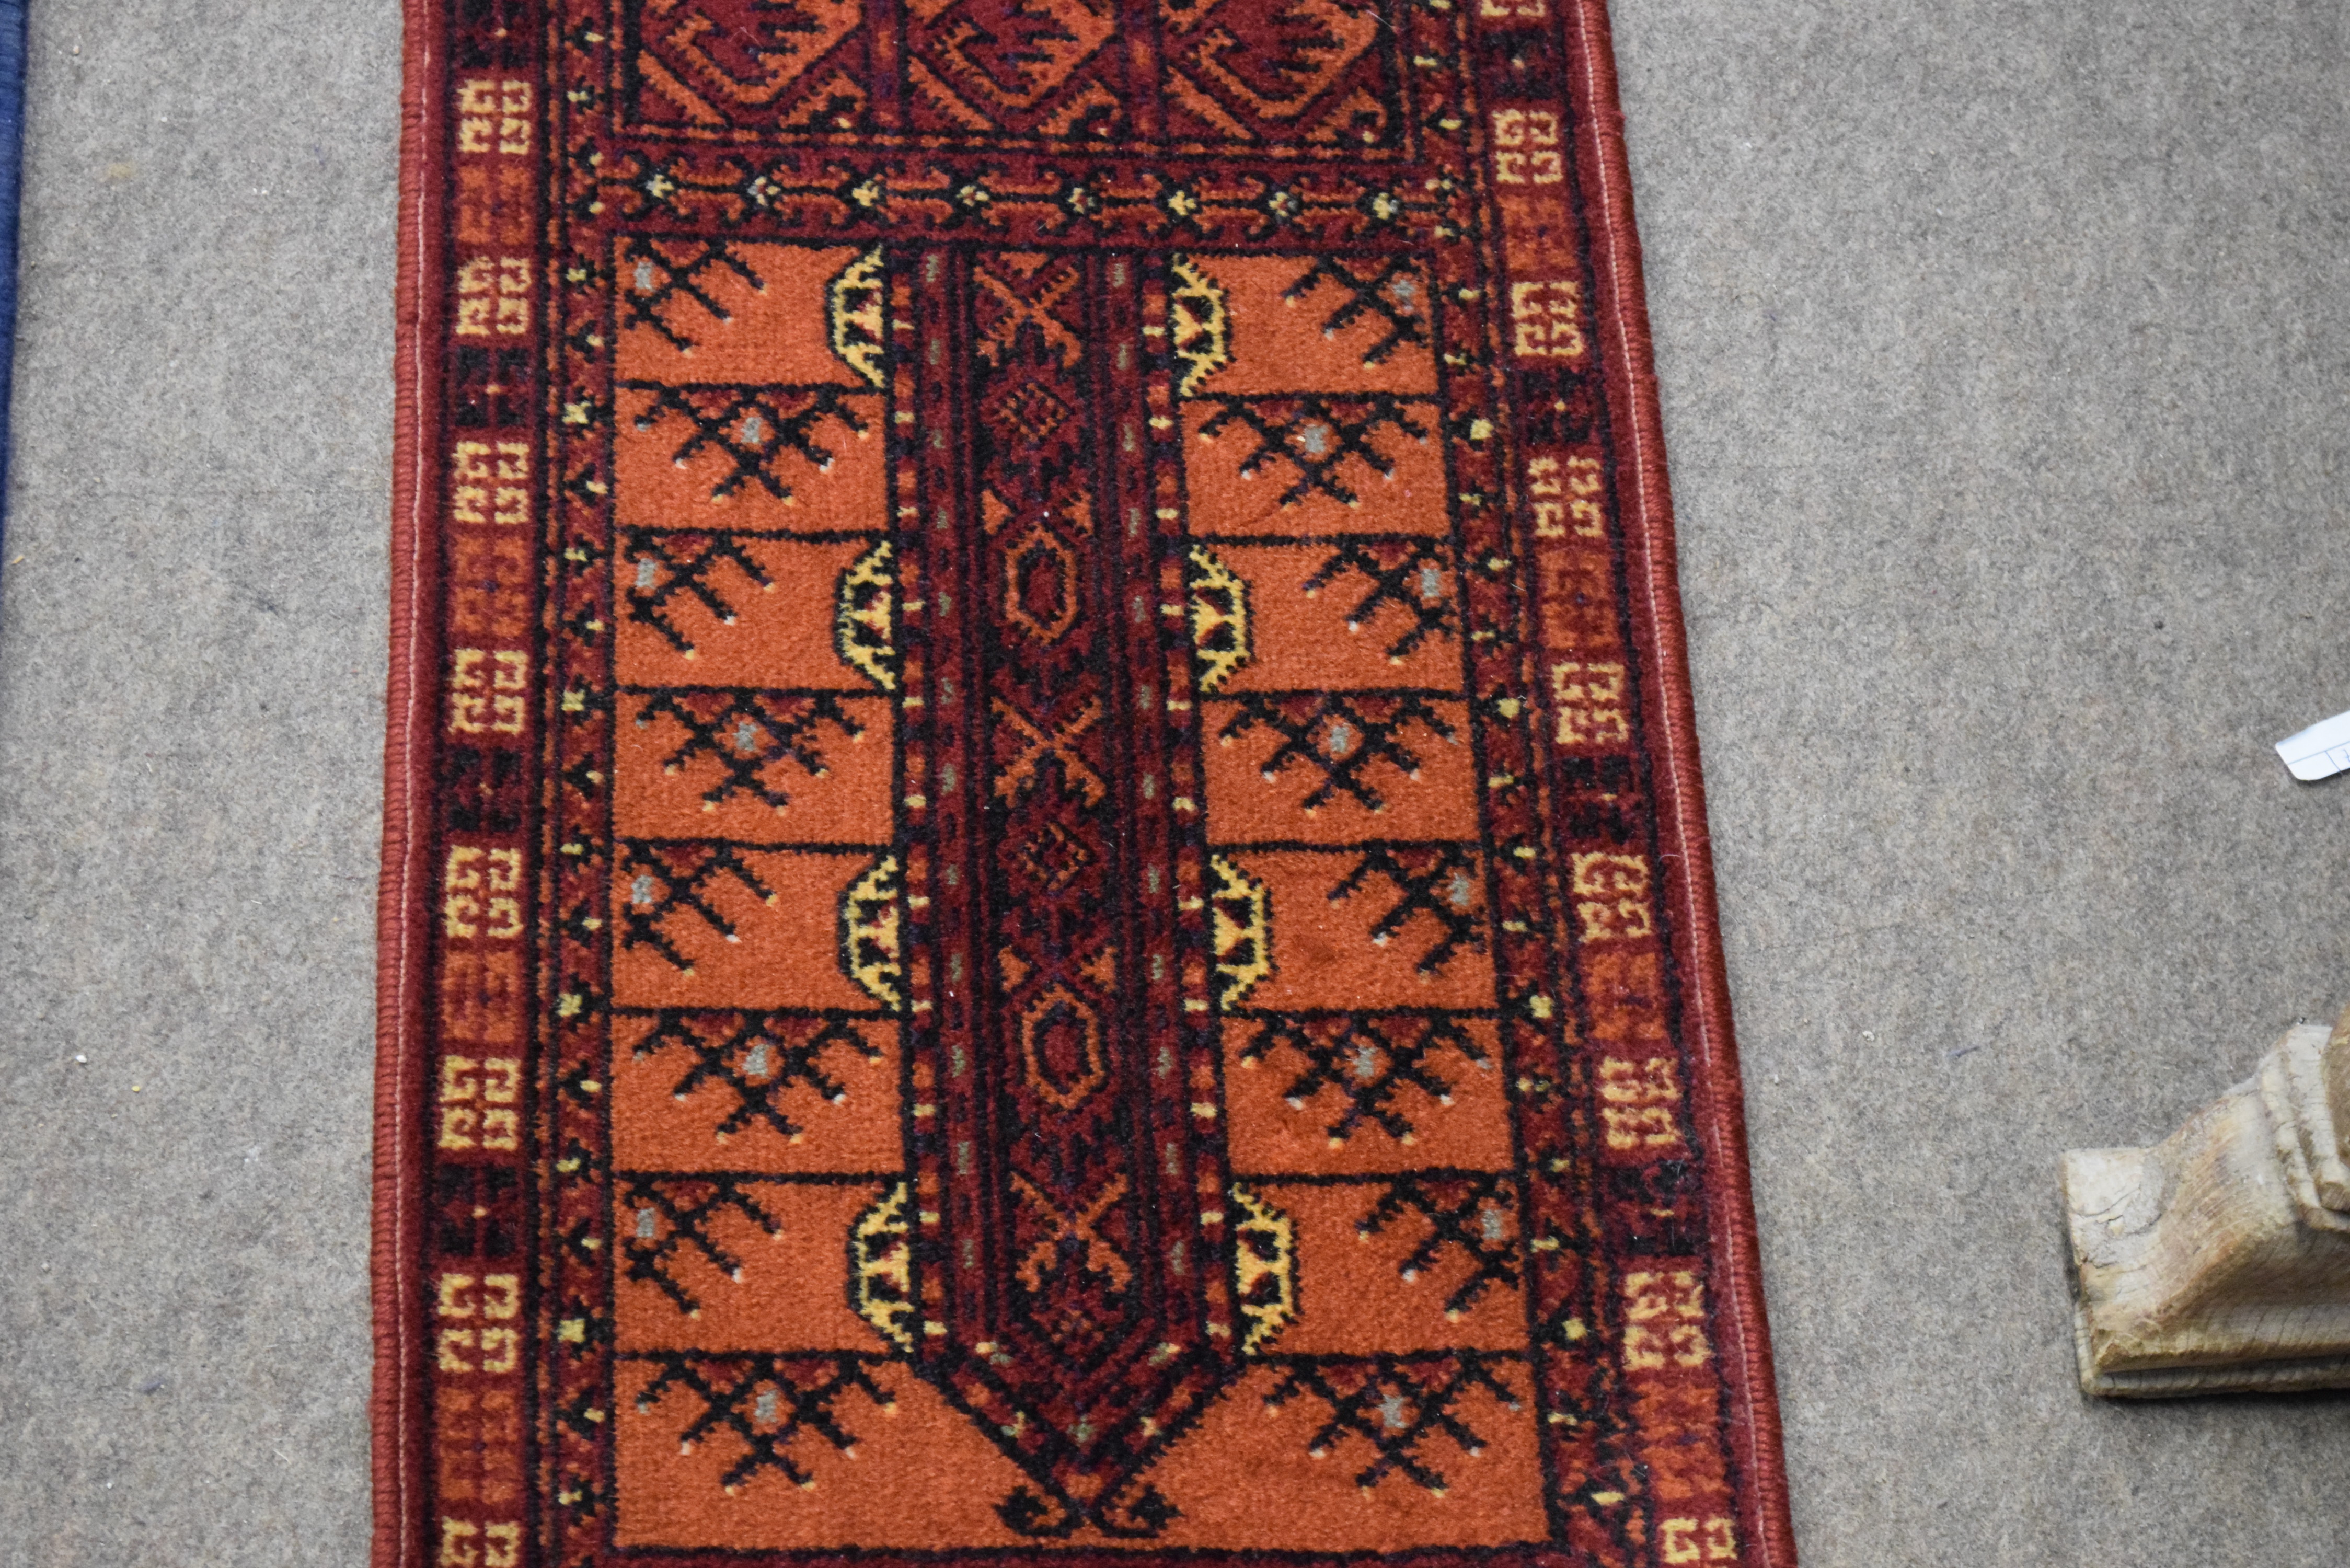 Small Middle Eastern wool runner carpet decorated with central lozenge on a principally red and - Image 4 of 4